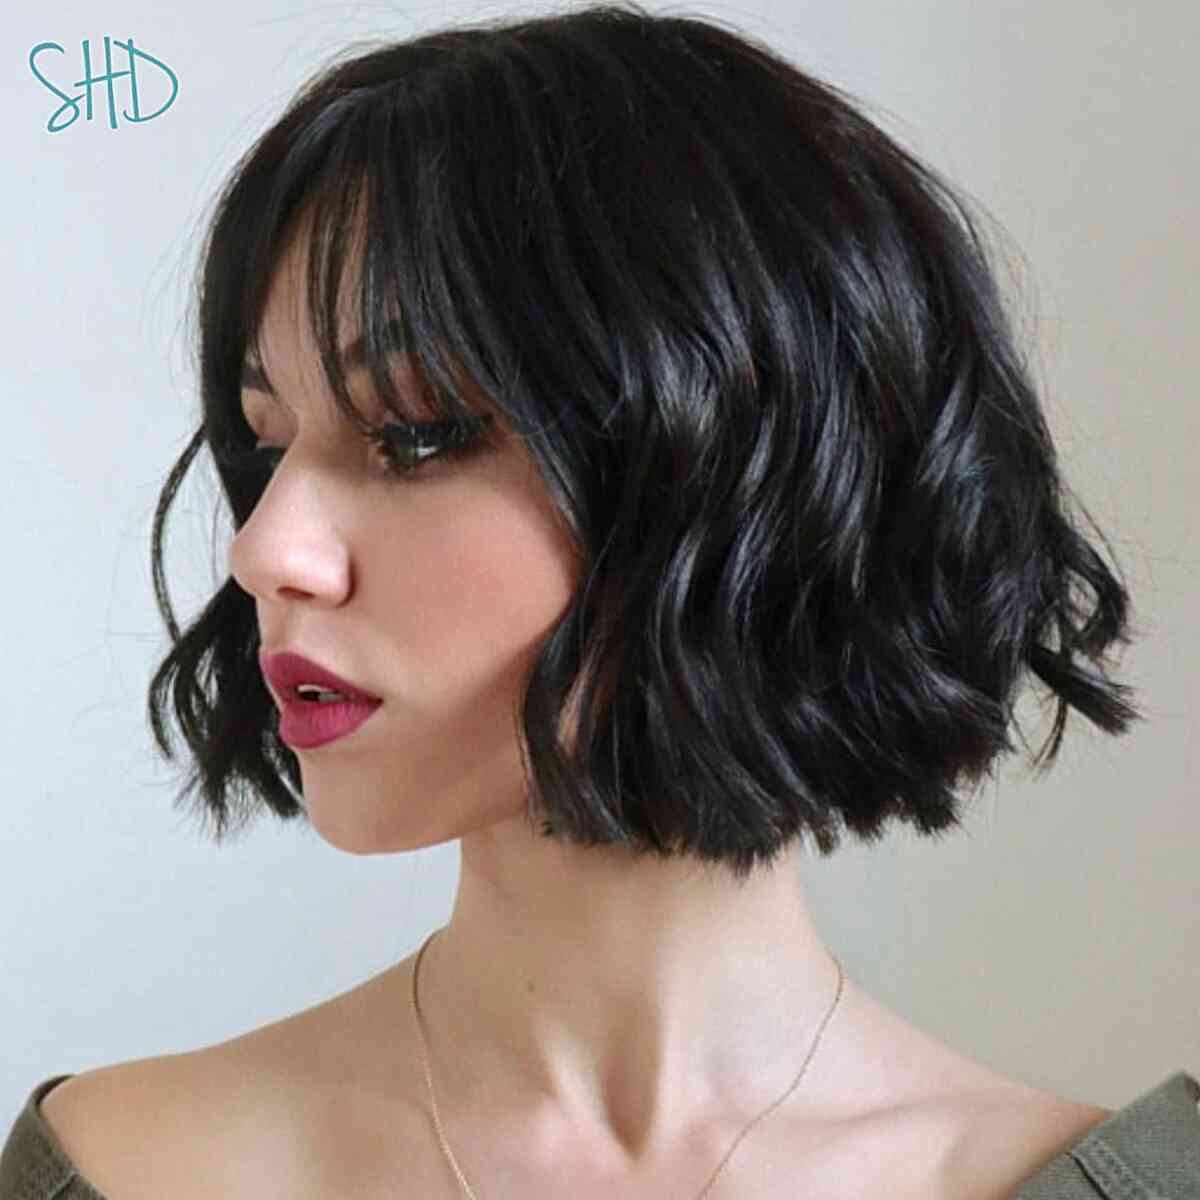 Stylish Messy French Bob on jaw-length hair with waves